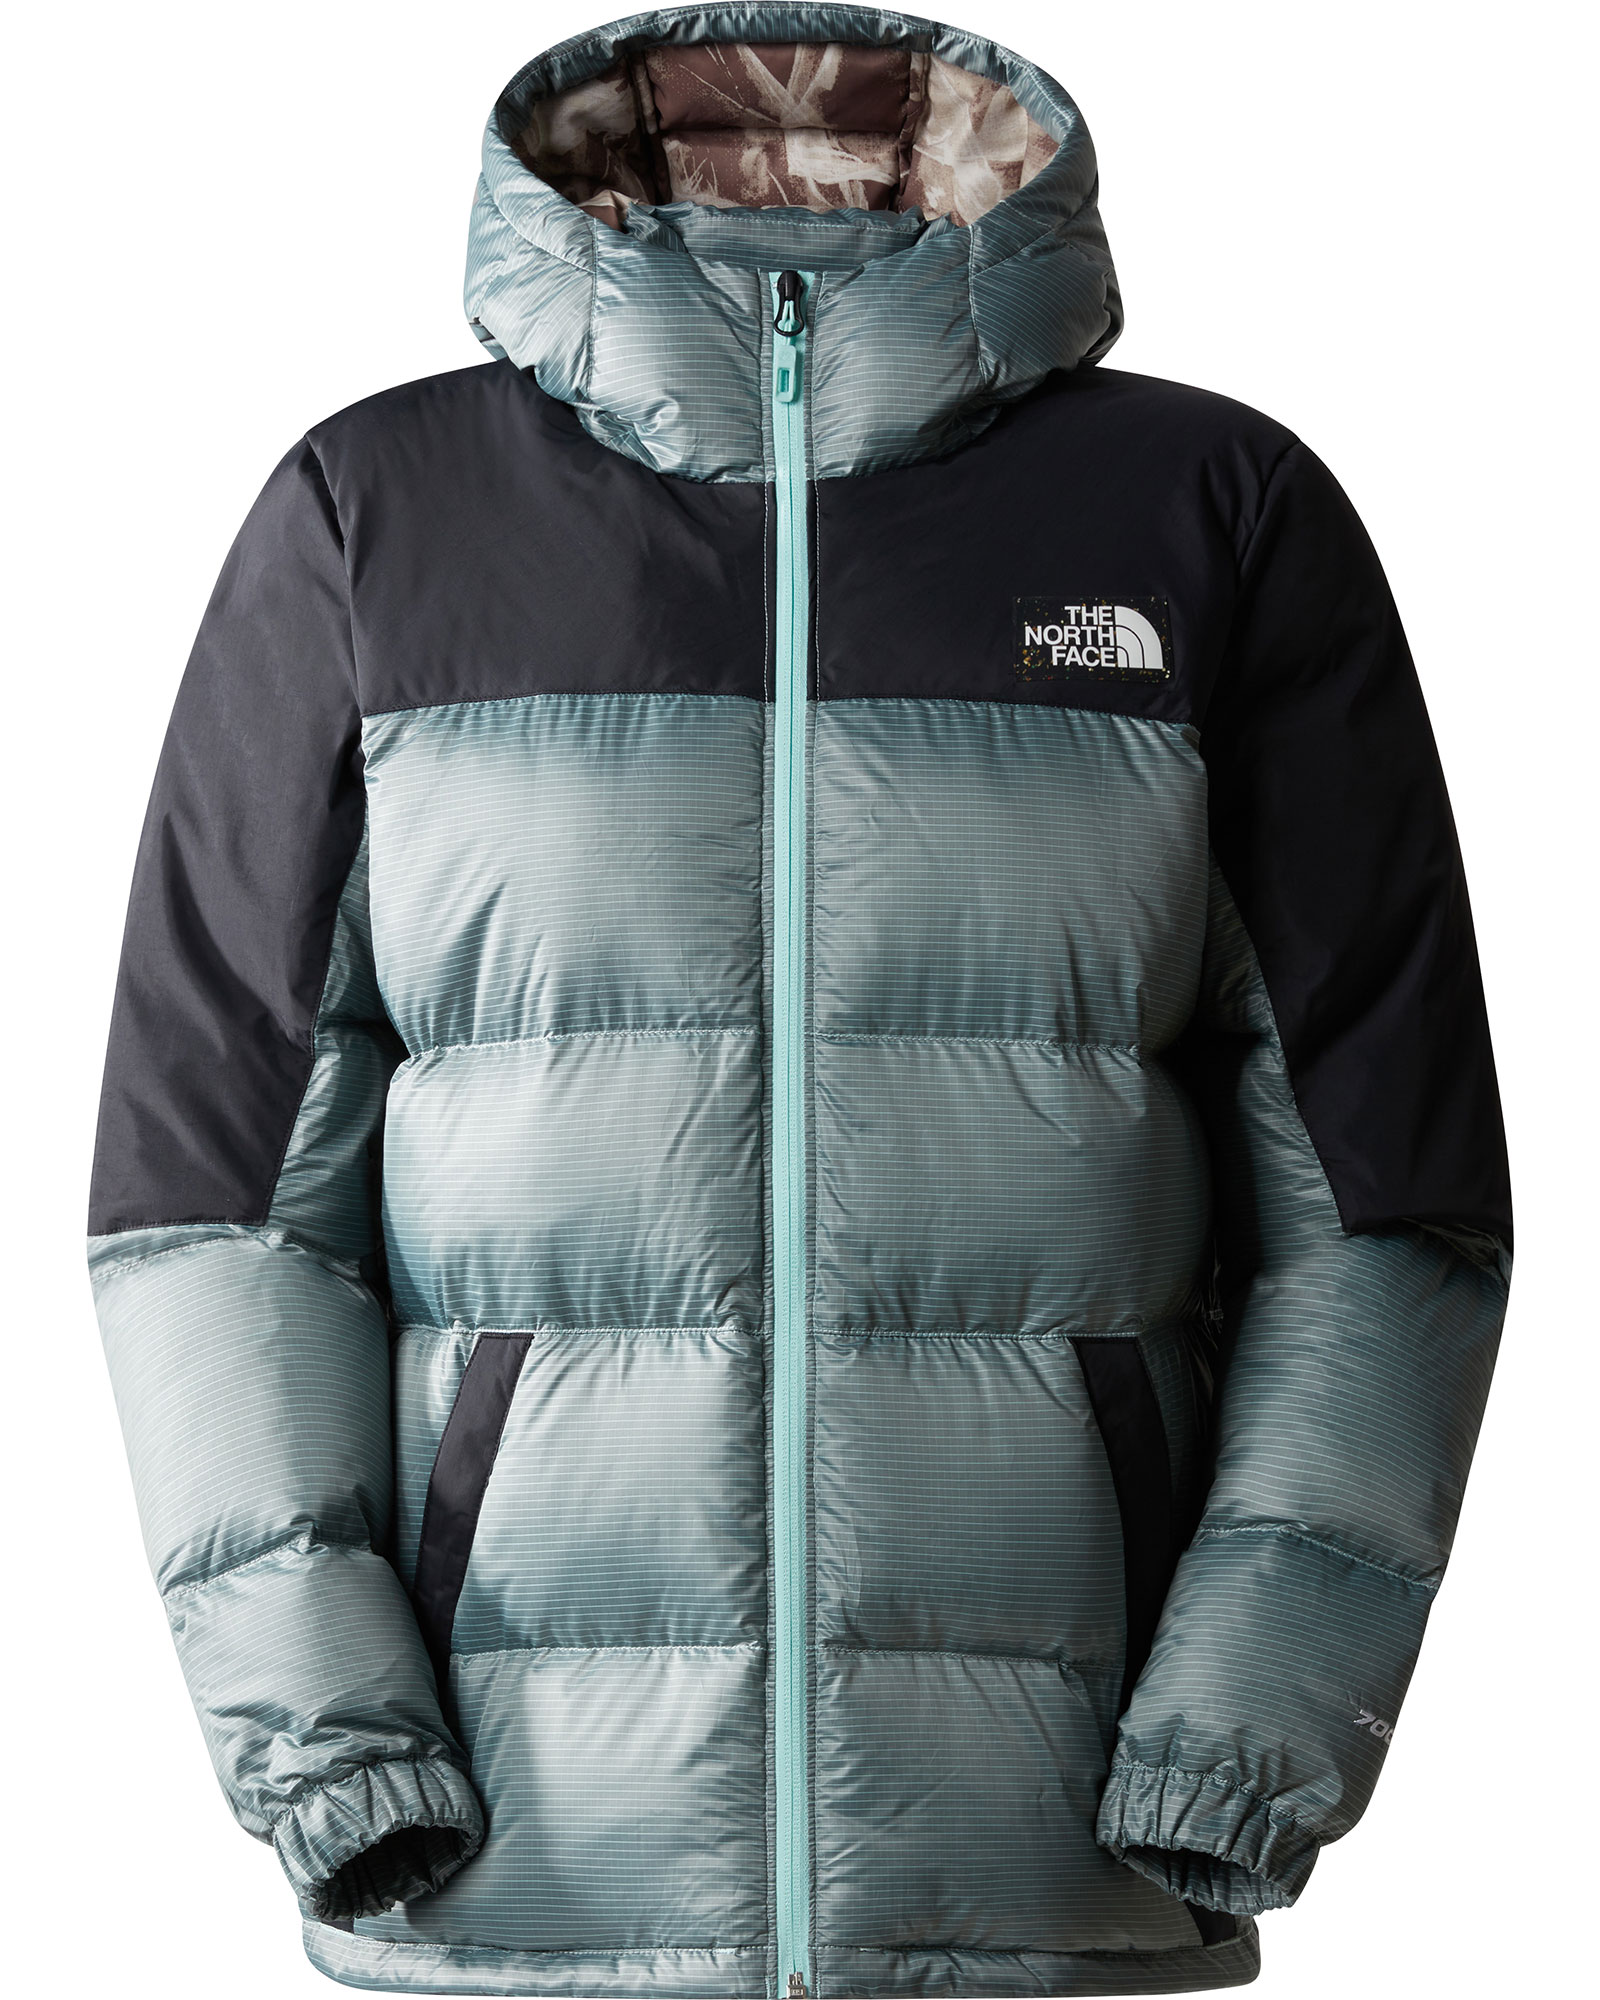 The North Face Diablo Recycled Women’s Down Hoodie - Powder Teal-TNF Black S